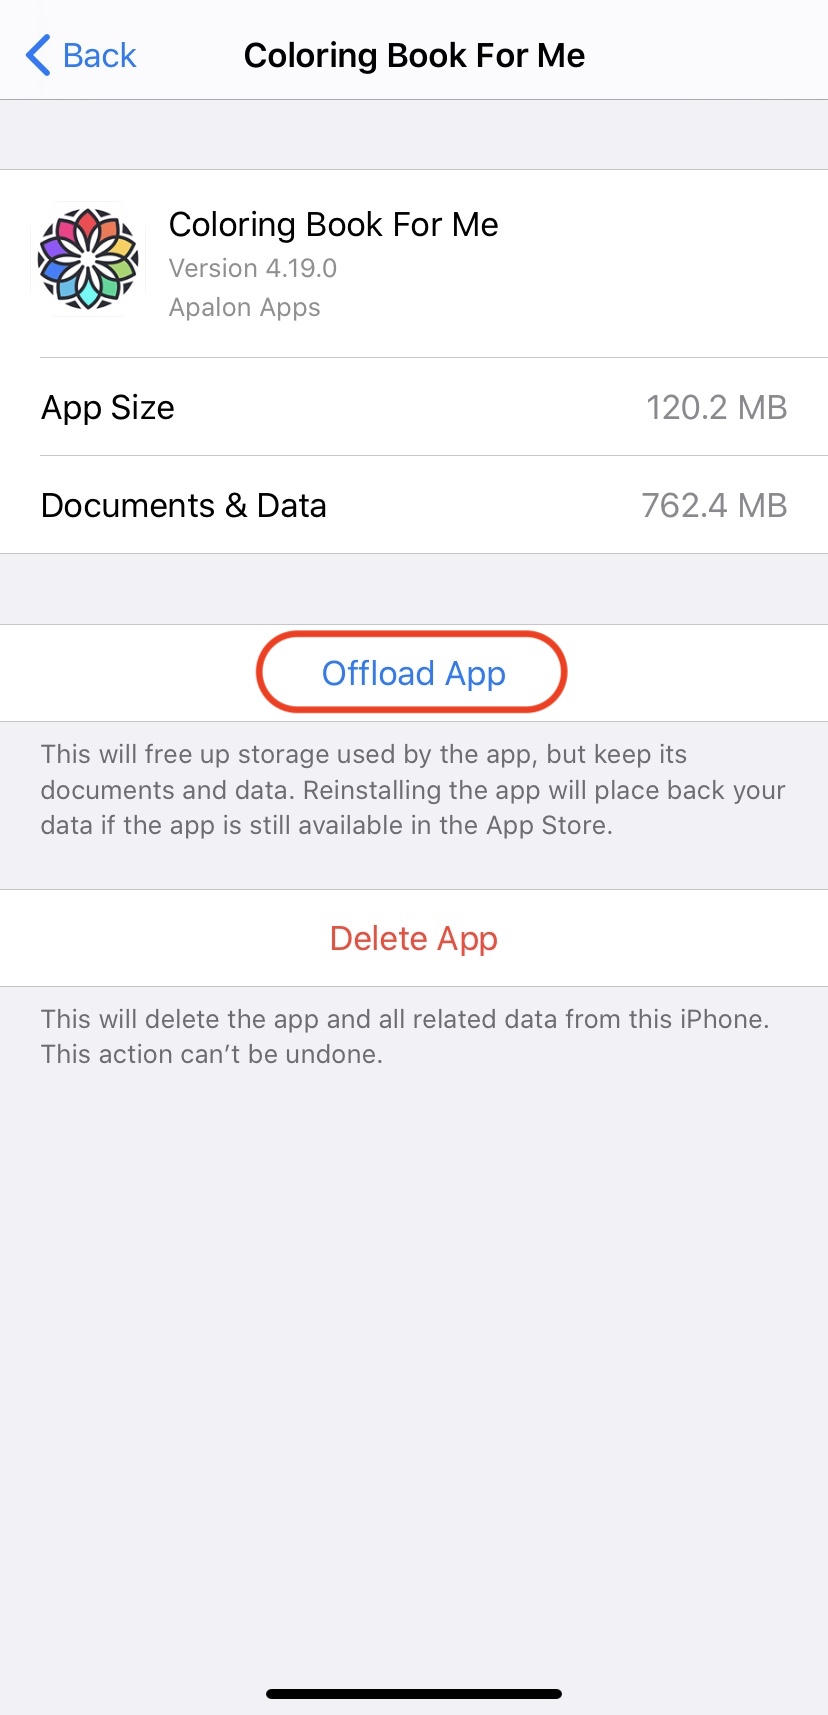 How do I uninstall and reinstall an app without losing data?